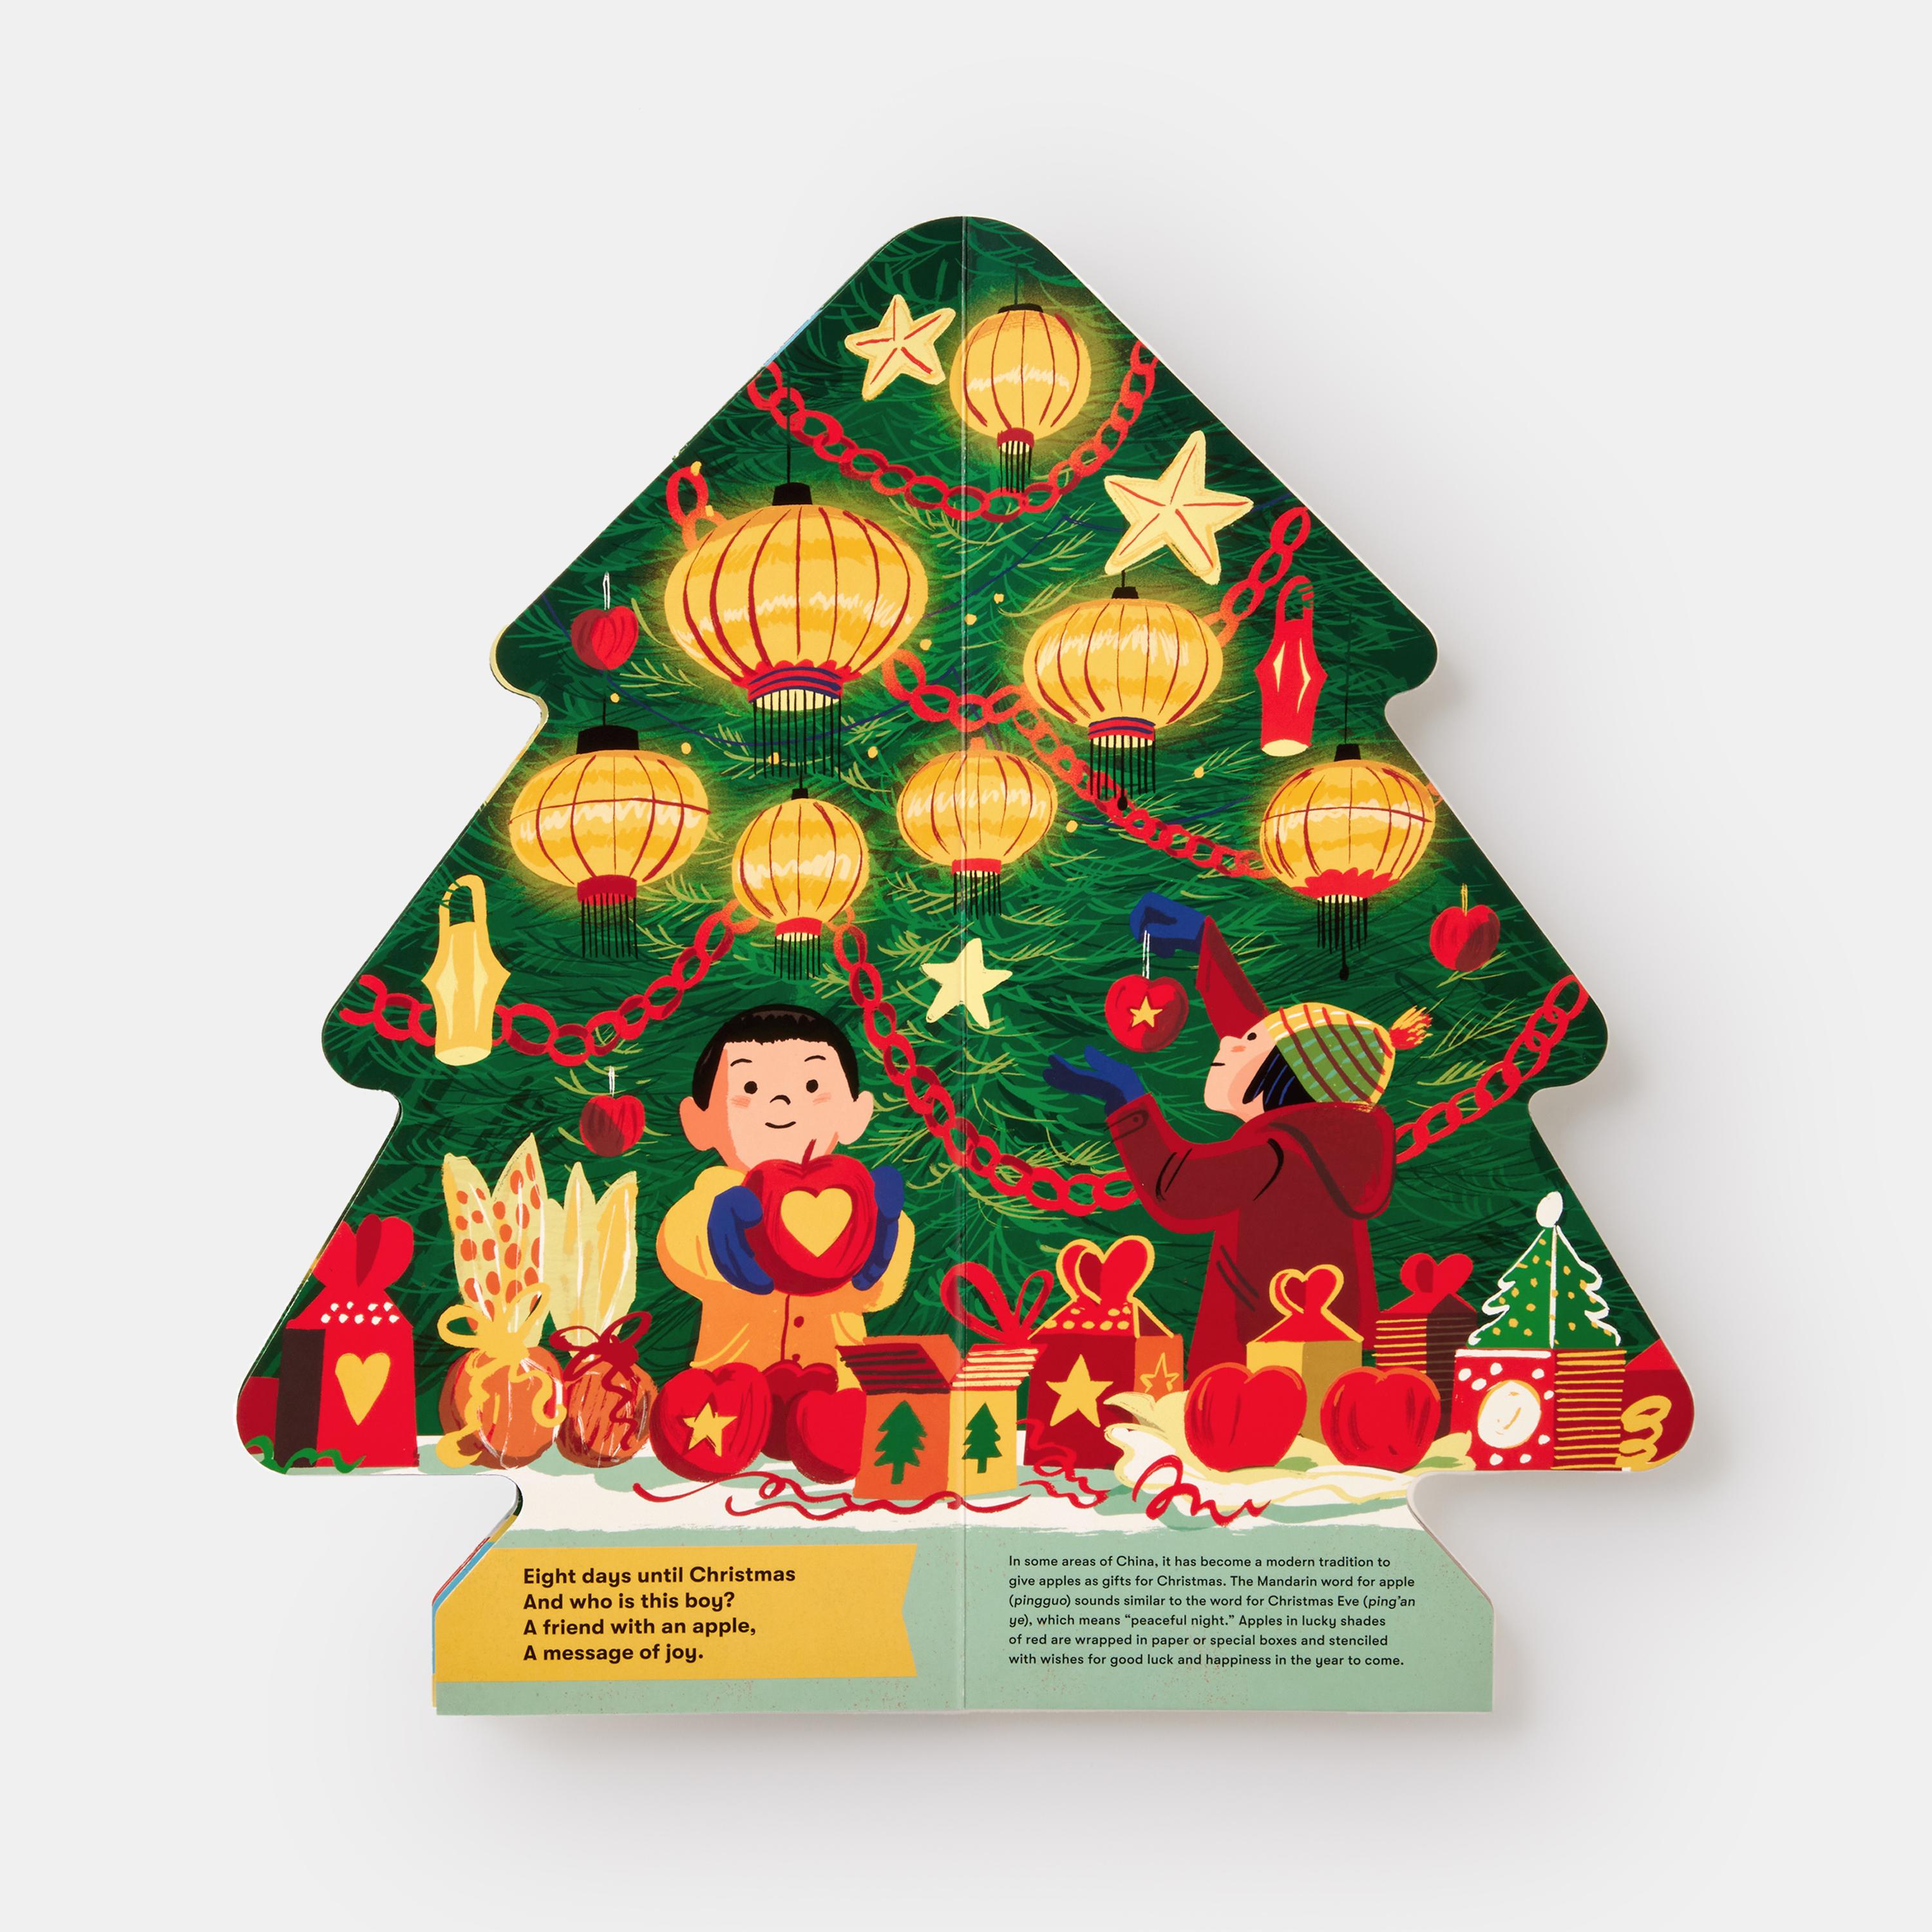 A global celebration of Christmas, this unique tree-shaped carousel-format novelty board book can be opened and folded back to create a free-standing Christmas tree using its integrated magnetic closure. A sturdy and gorgeous gift featuring